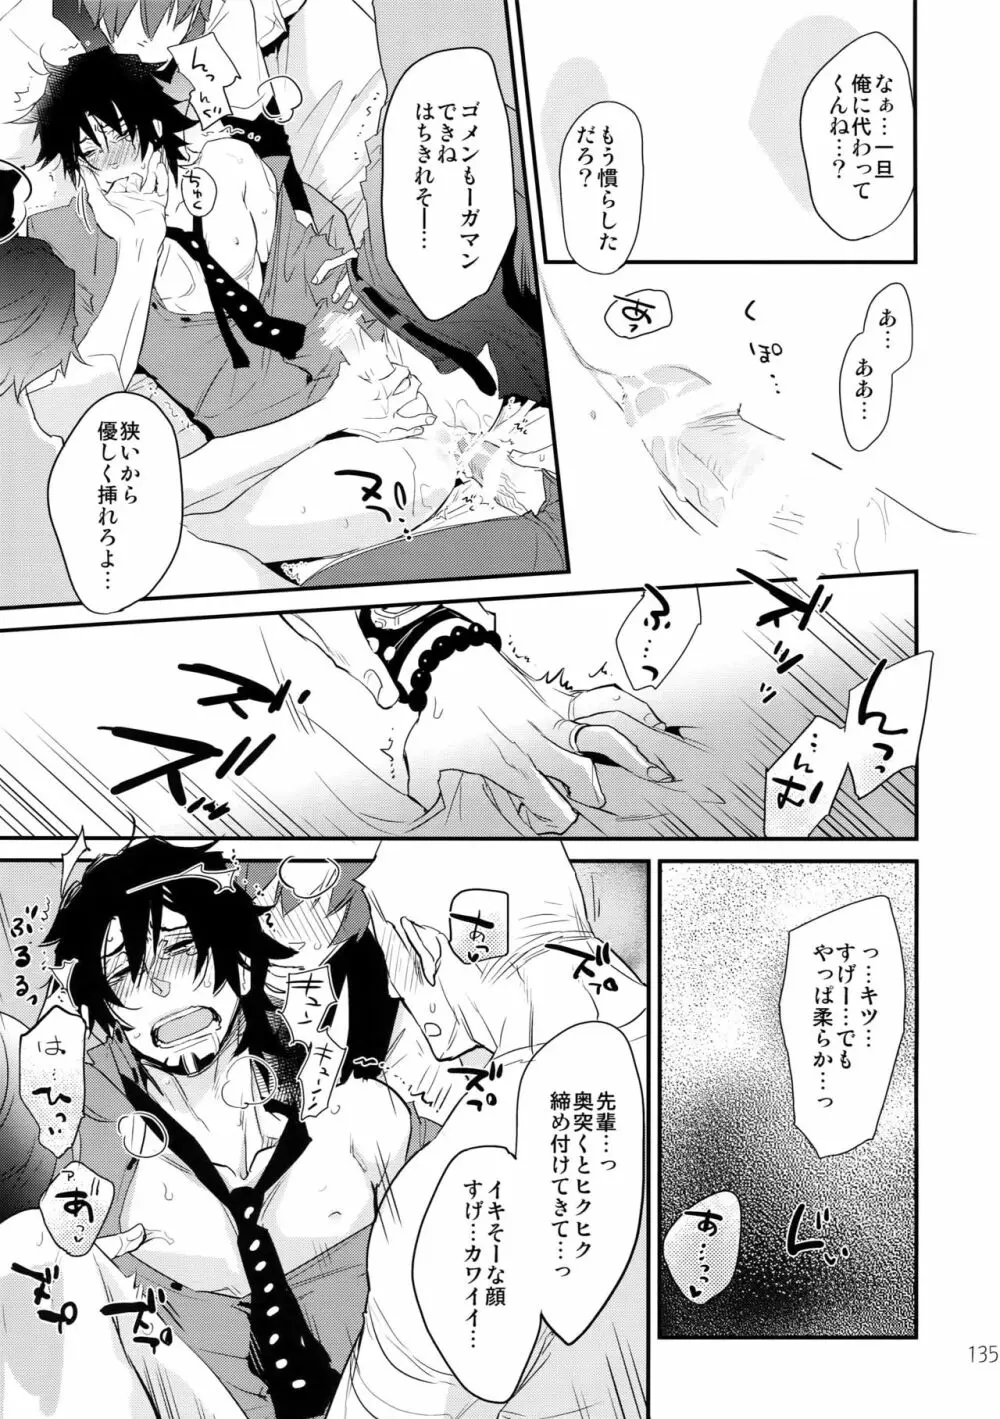 T&B再録!2 - page134